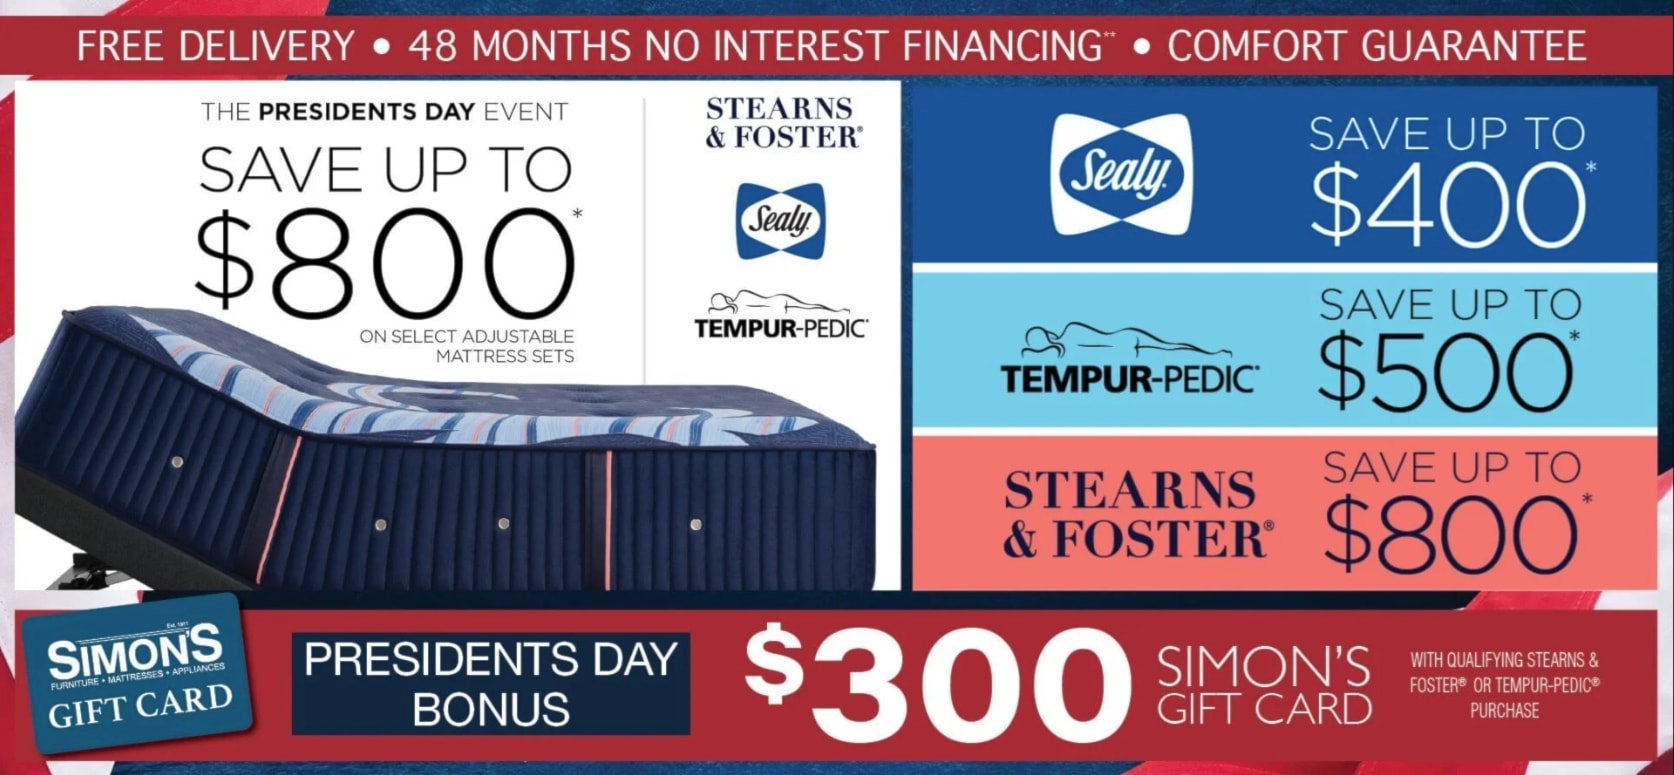 get a $300 visa gift card with the purchase of a Stearns and Foster or Tempurpedic mattress